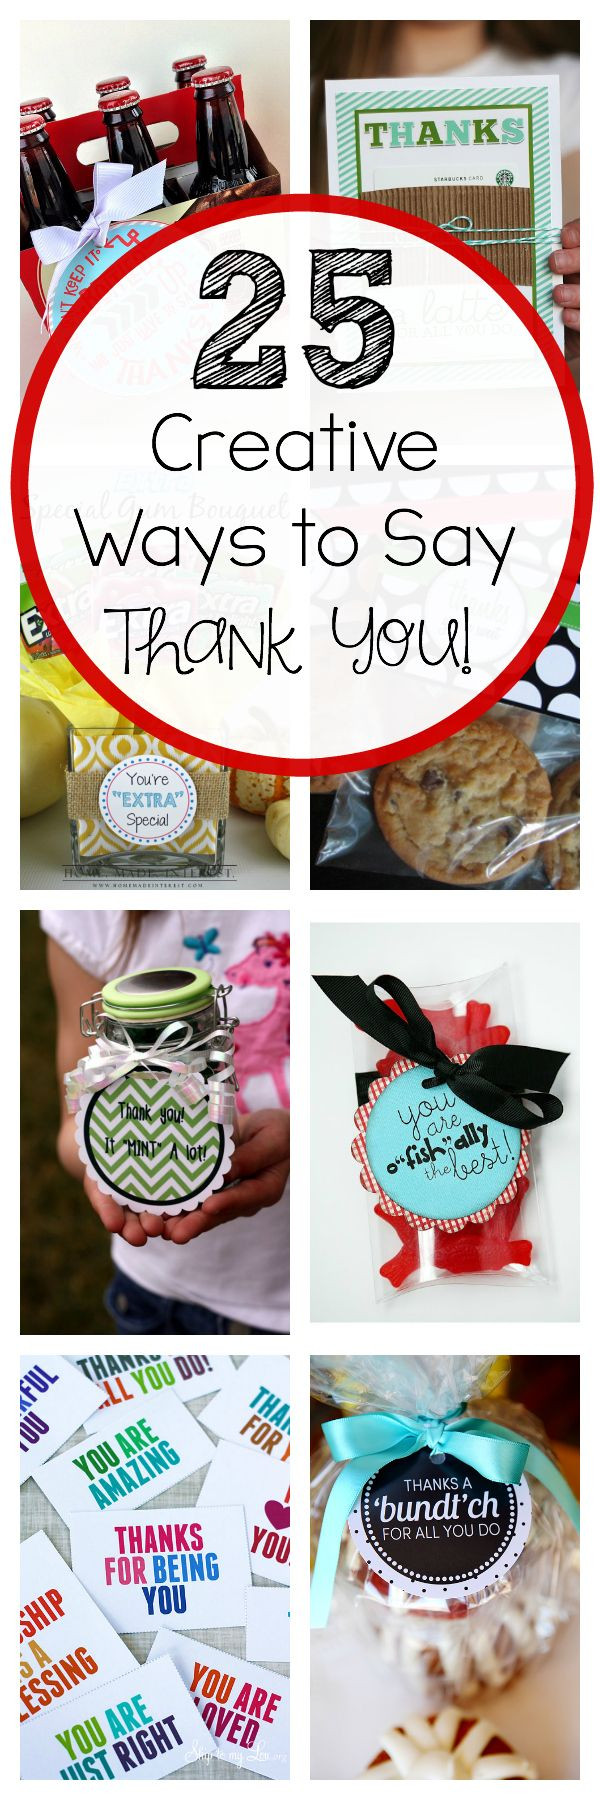 Best Thank You Gift Ideas
 Best 25 Thank you ts ideas only on Pinterest